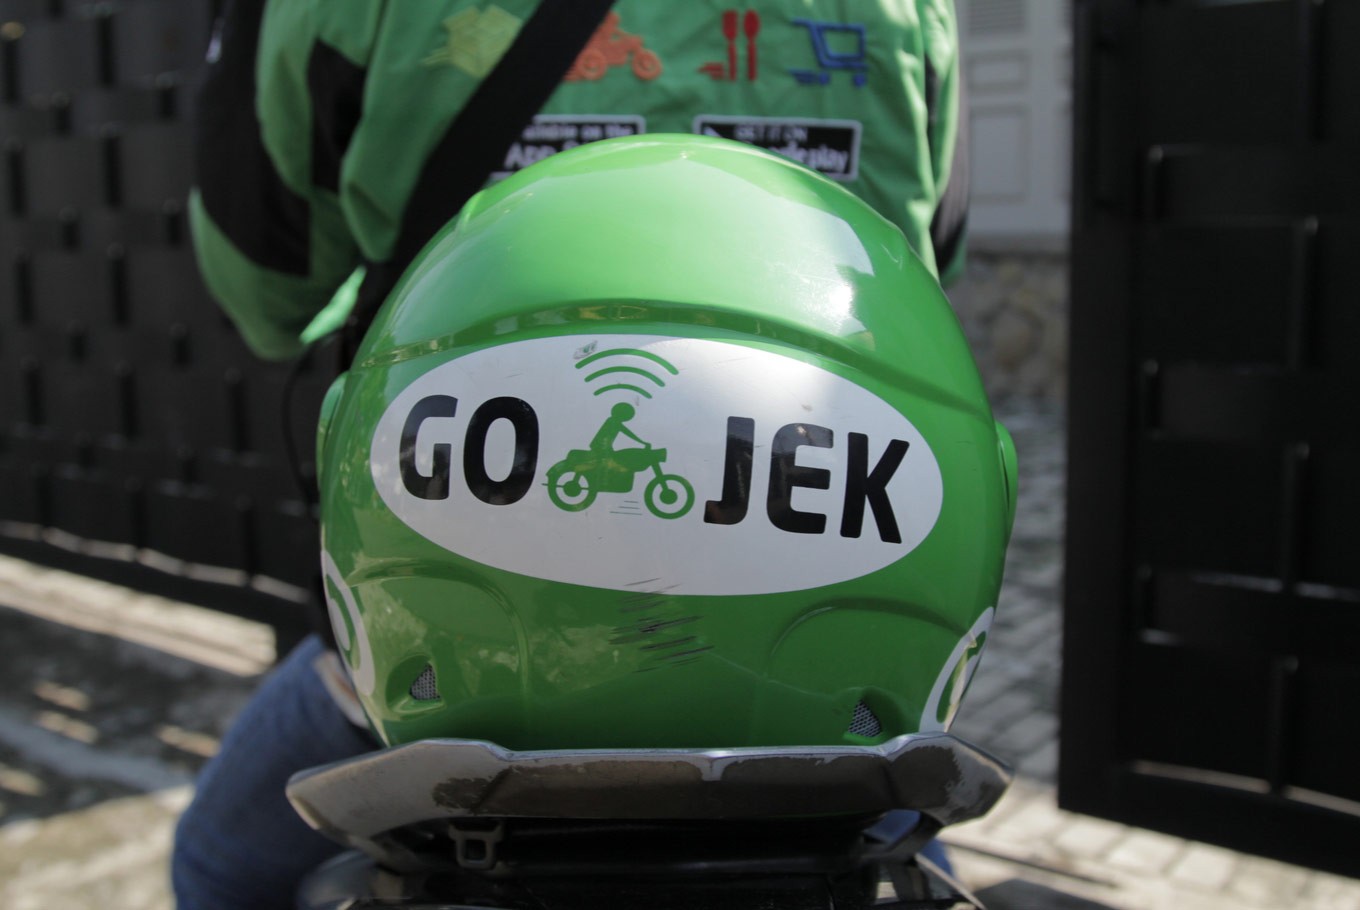 LTFRB rejects application of Indonesia’s ride-hailing firm Go-Jek